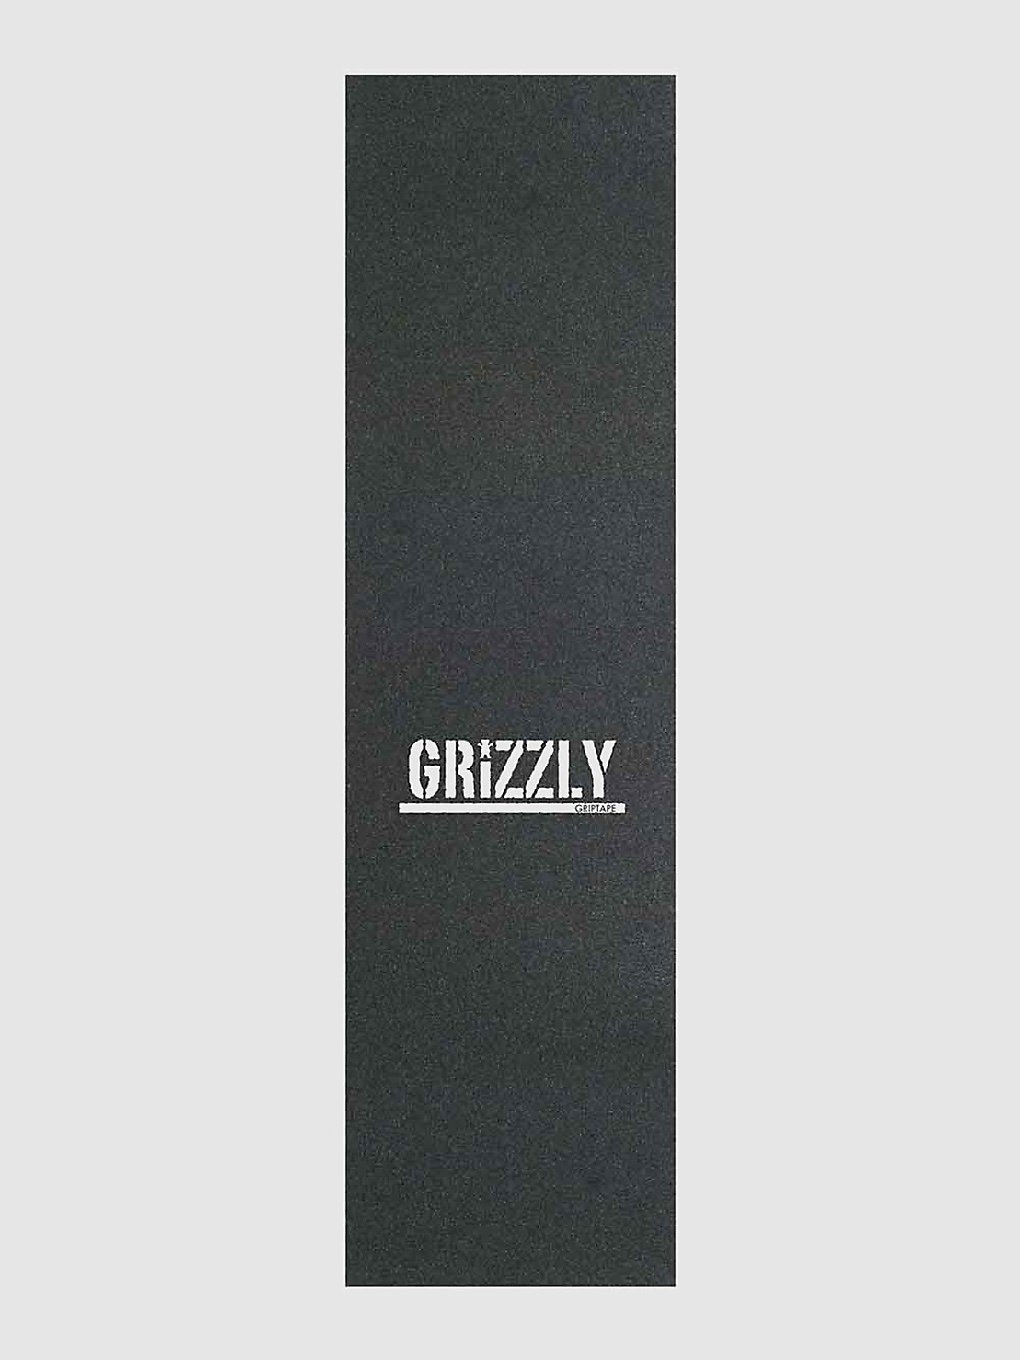 Grizzly Tramp Stamp Griptape patroon